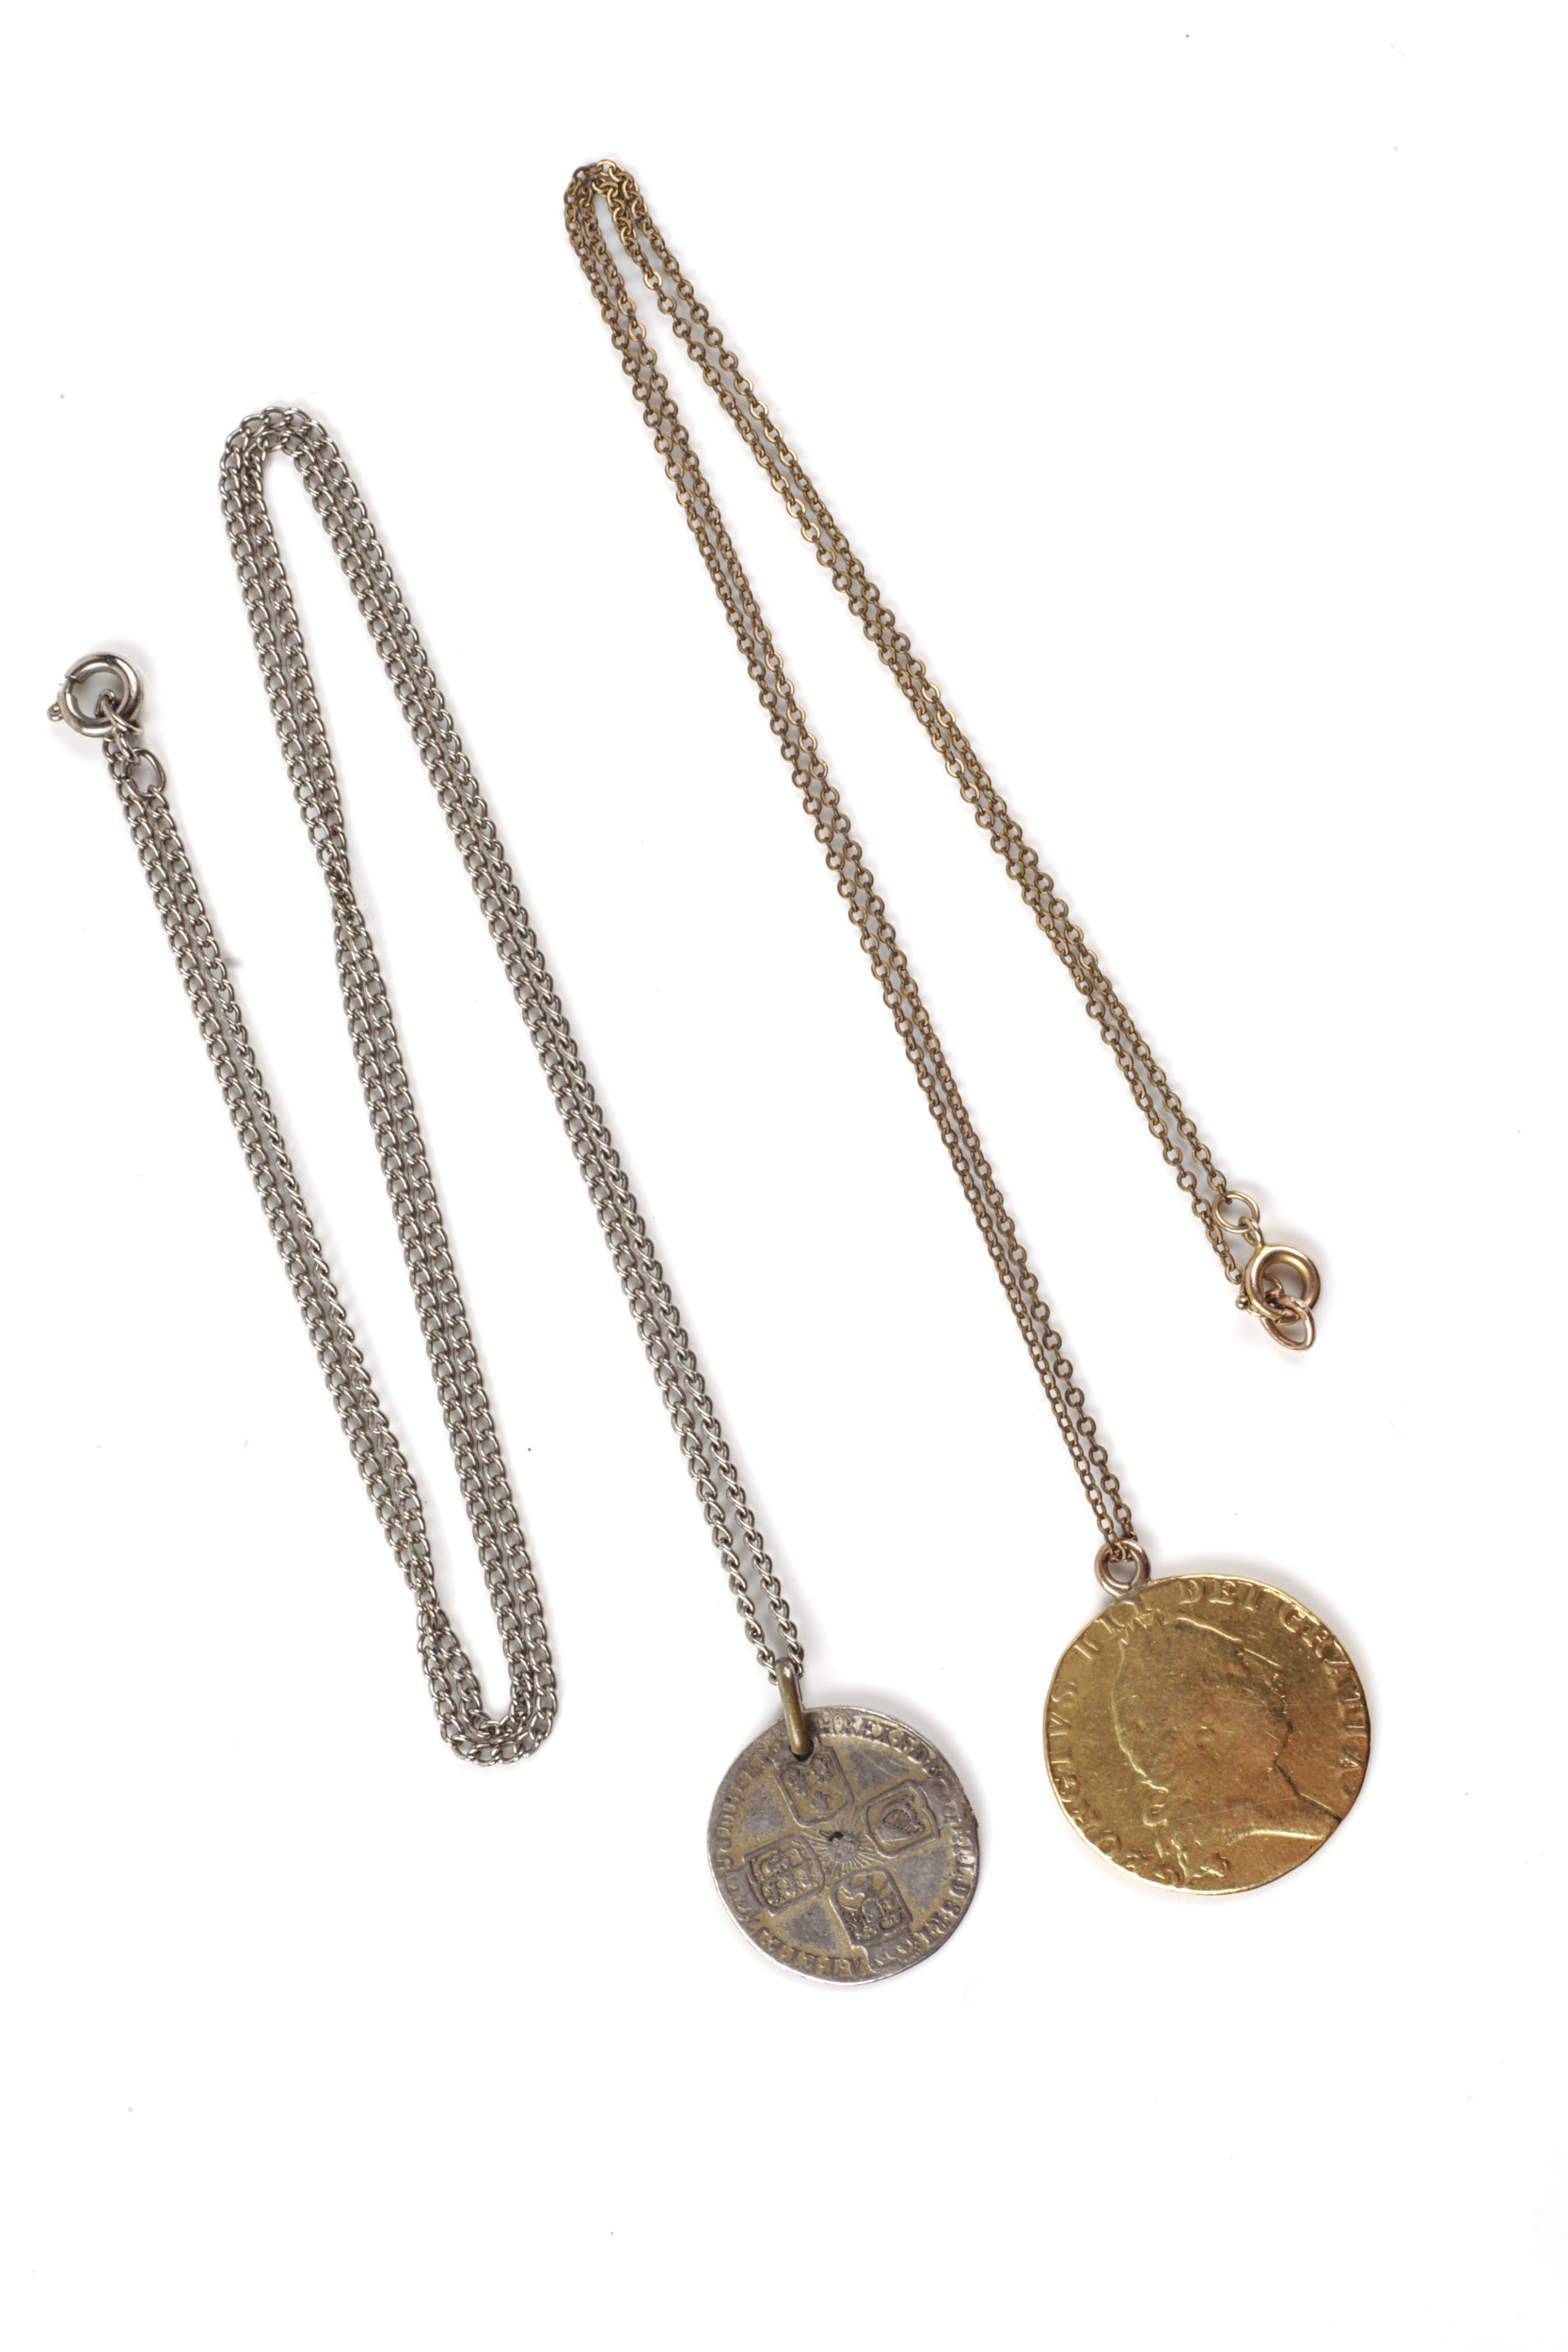 A George III gold 'Spade' type guinea 1790, with a soldered pendant loop. Approx.